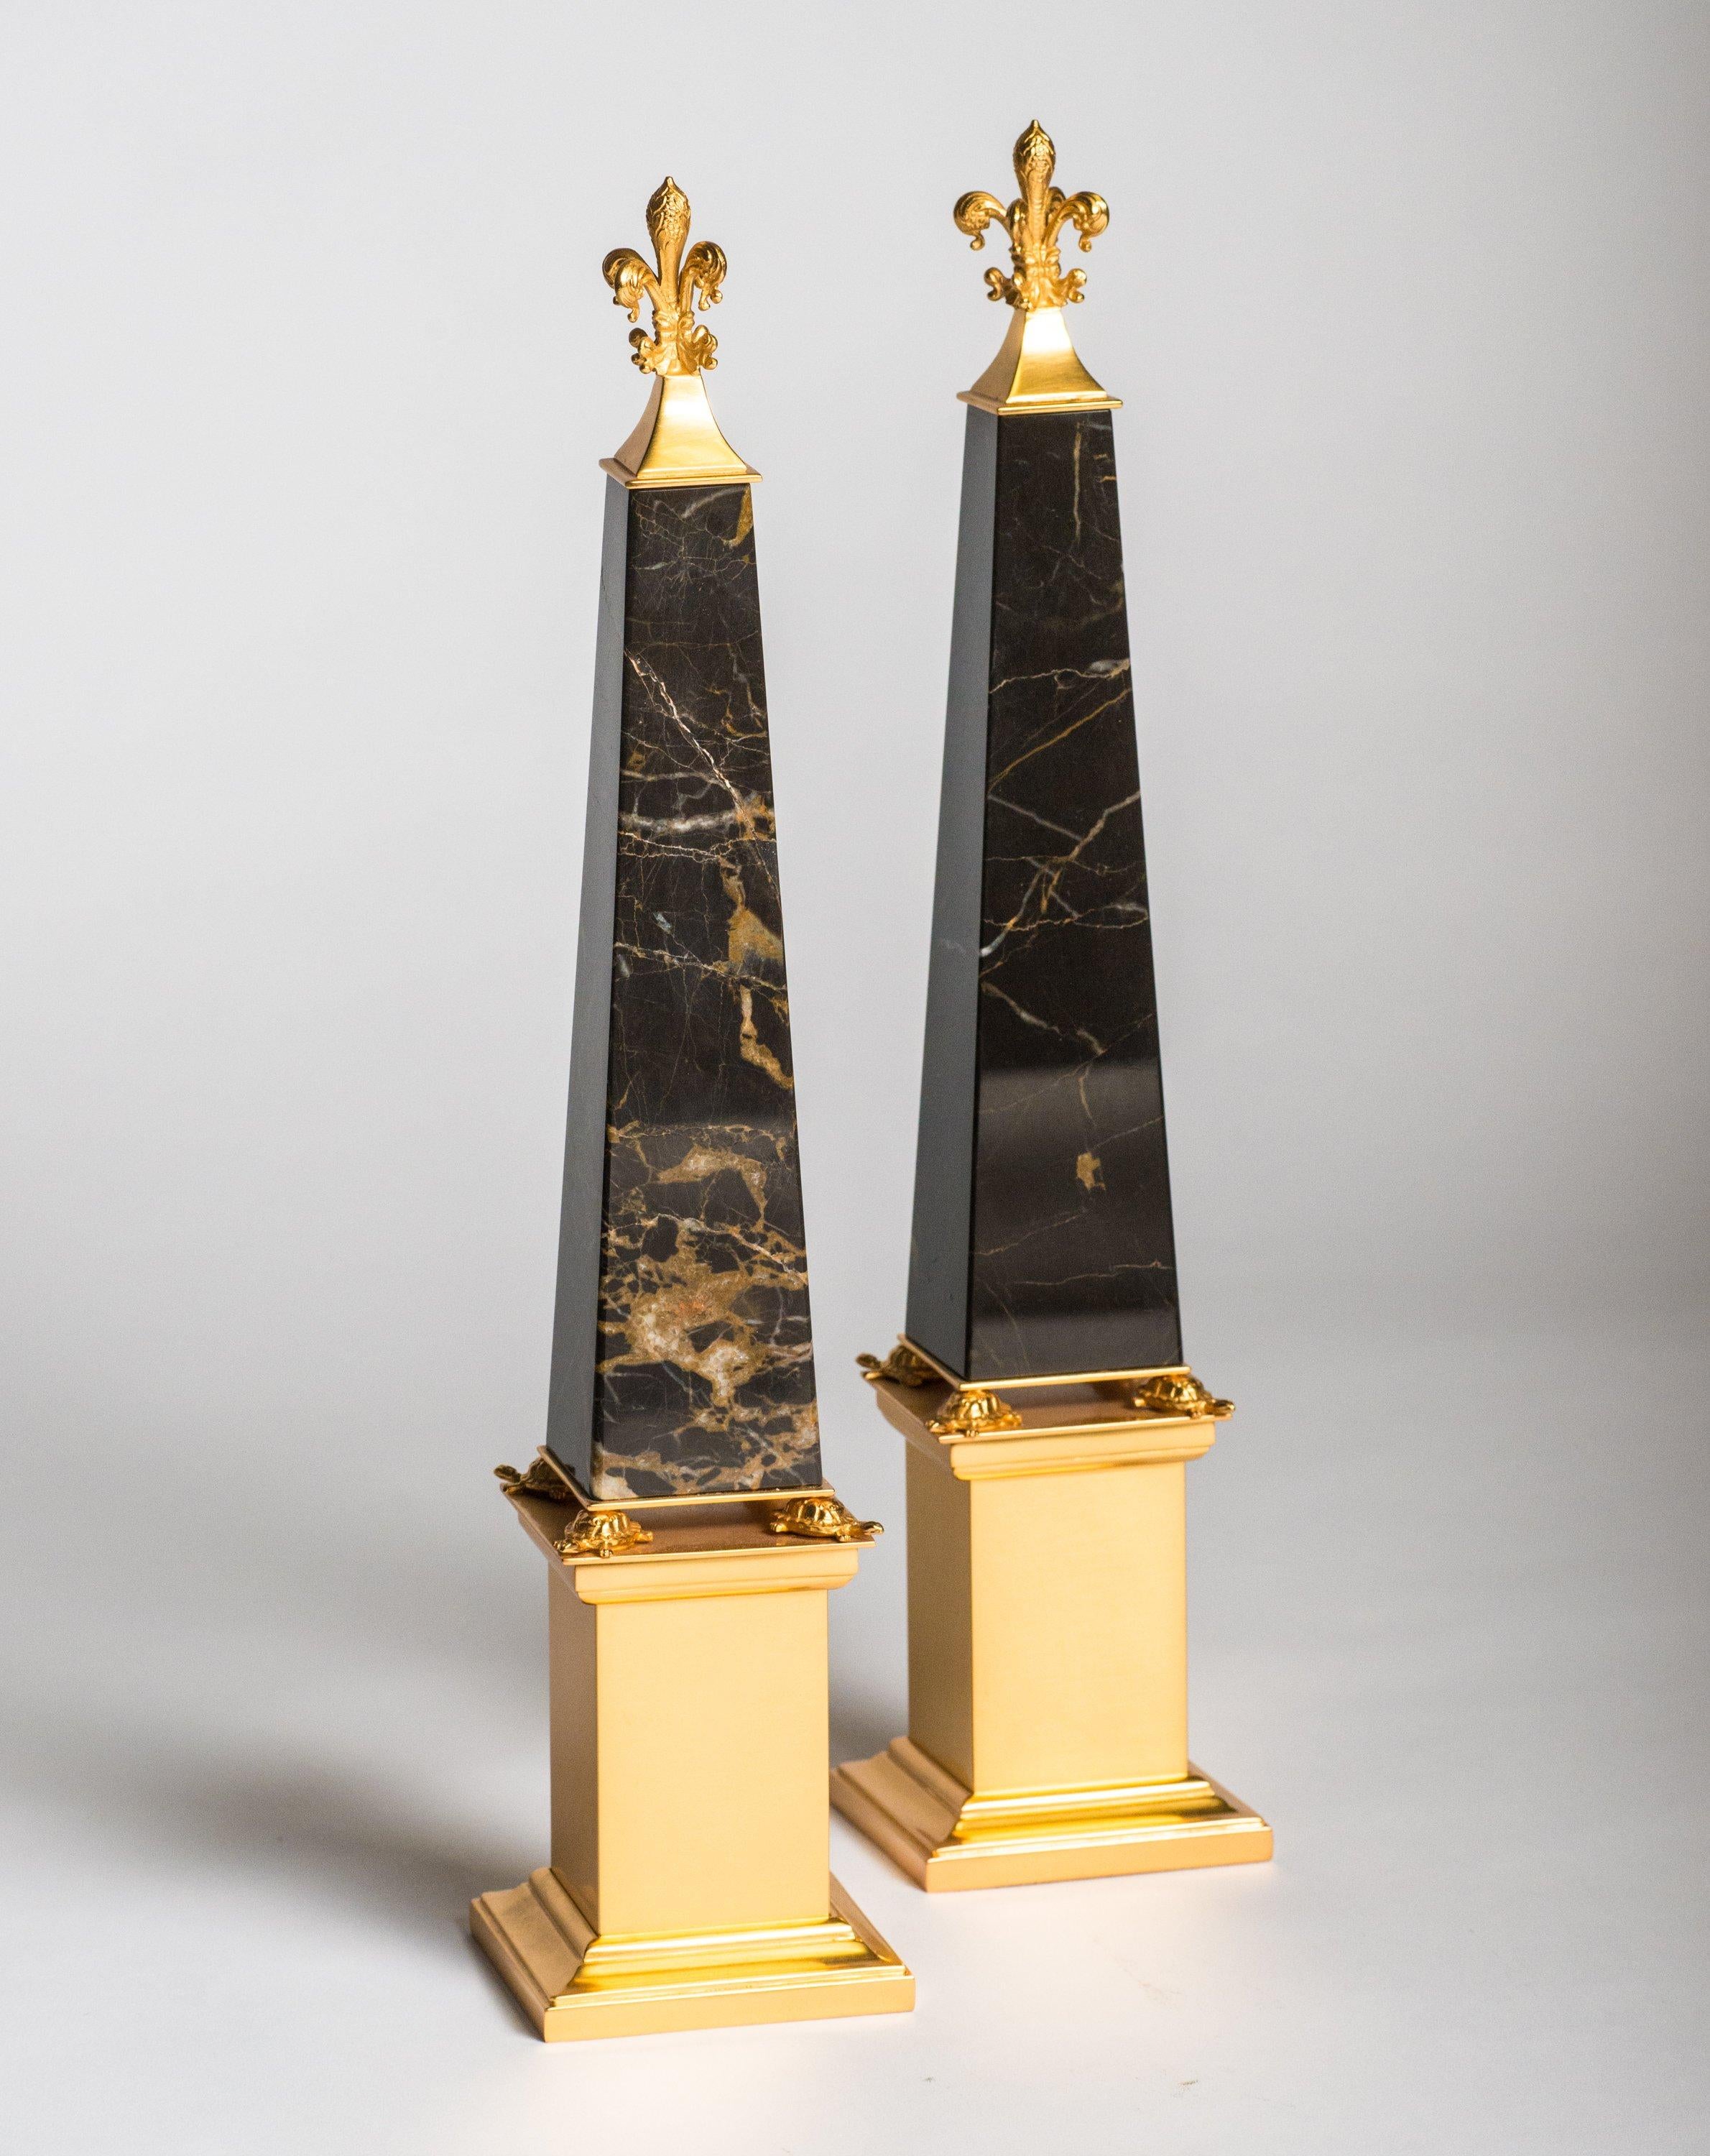 A pair of bronze & black and gold St. Laurent marble obelisks embellished with tortoises made by a master bronze maker in Florence, Italy.